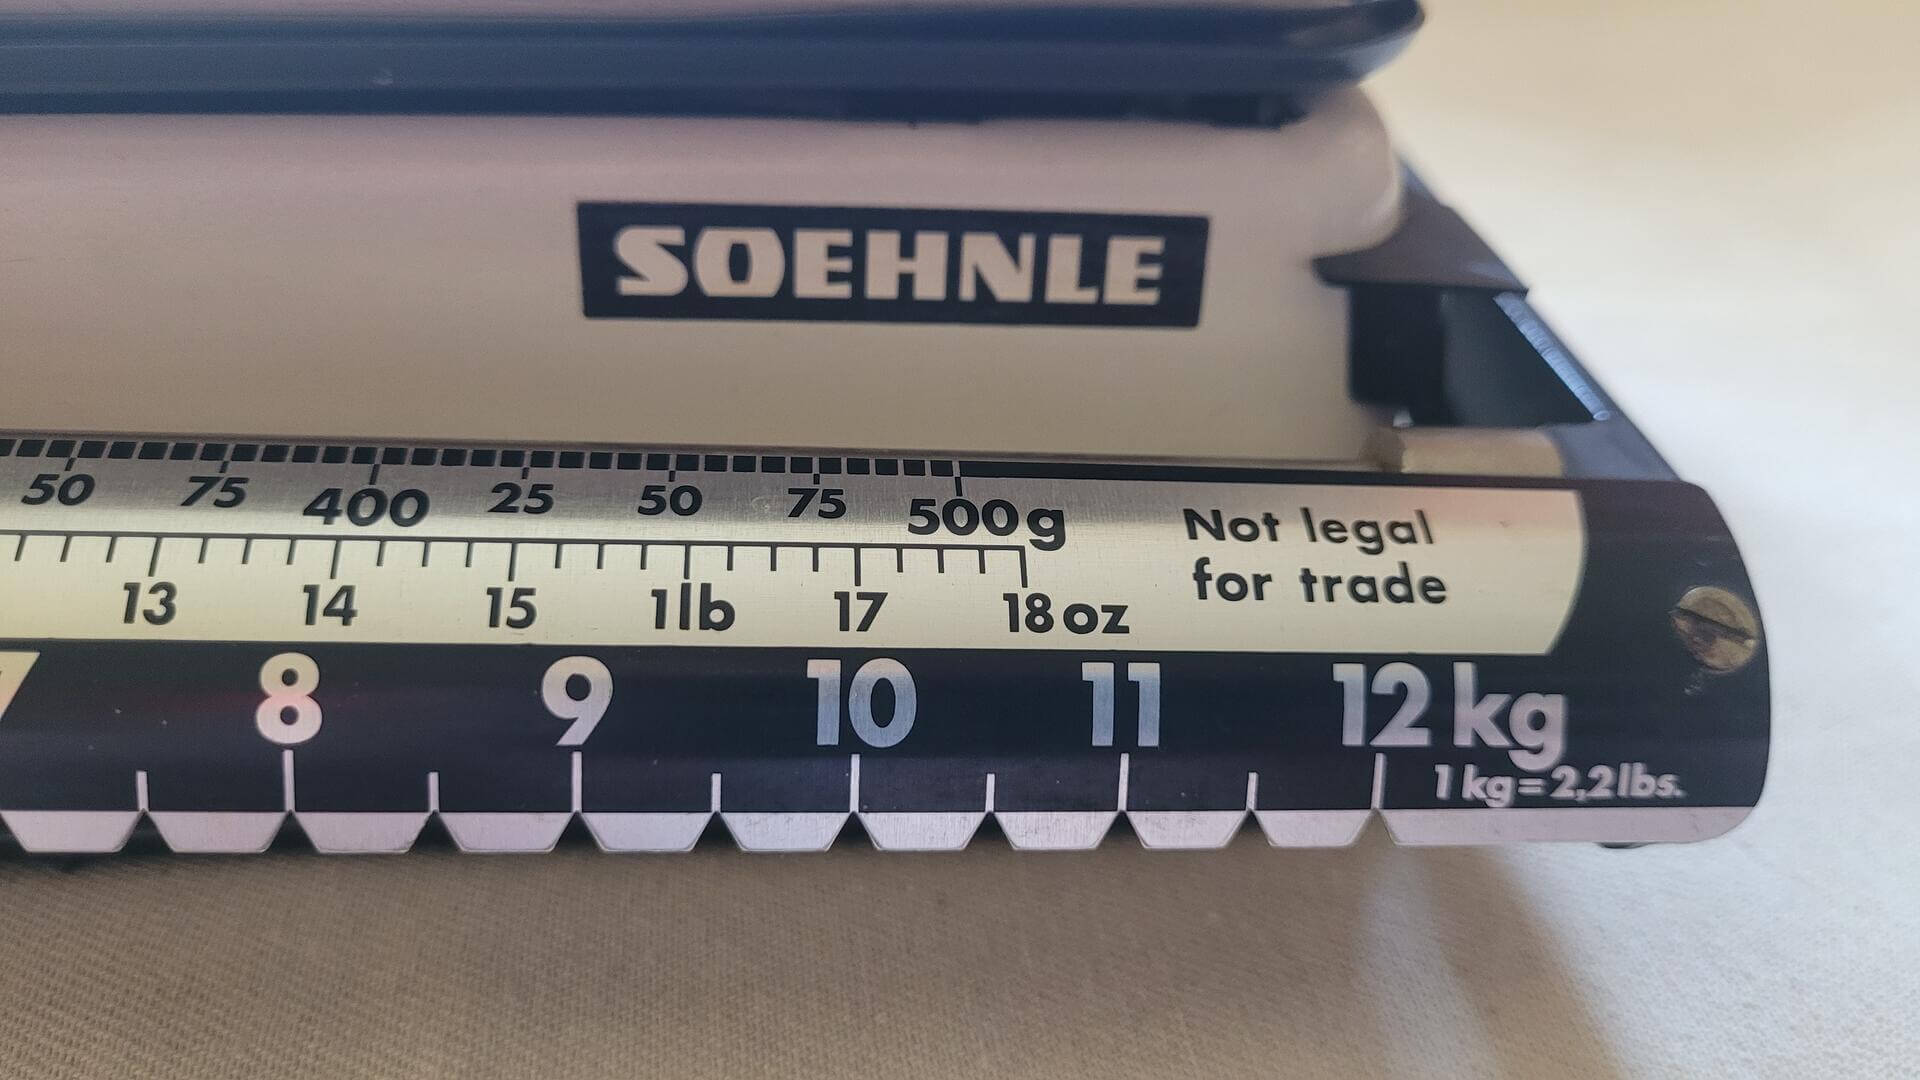 Nice retro 1960s Soehnle sliding 12 kg white mechanical kitchen scale made in Germany - Vintage mid century collectible kitchenware and measuring tool